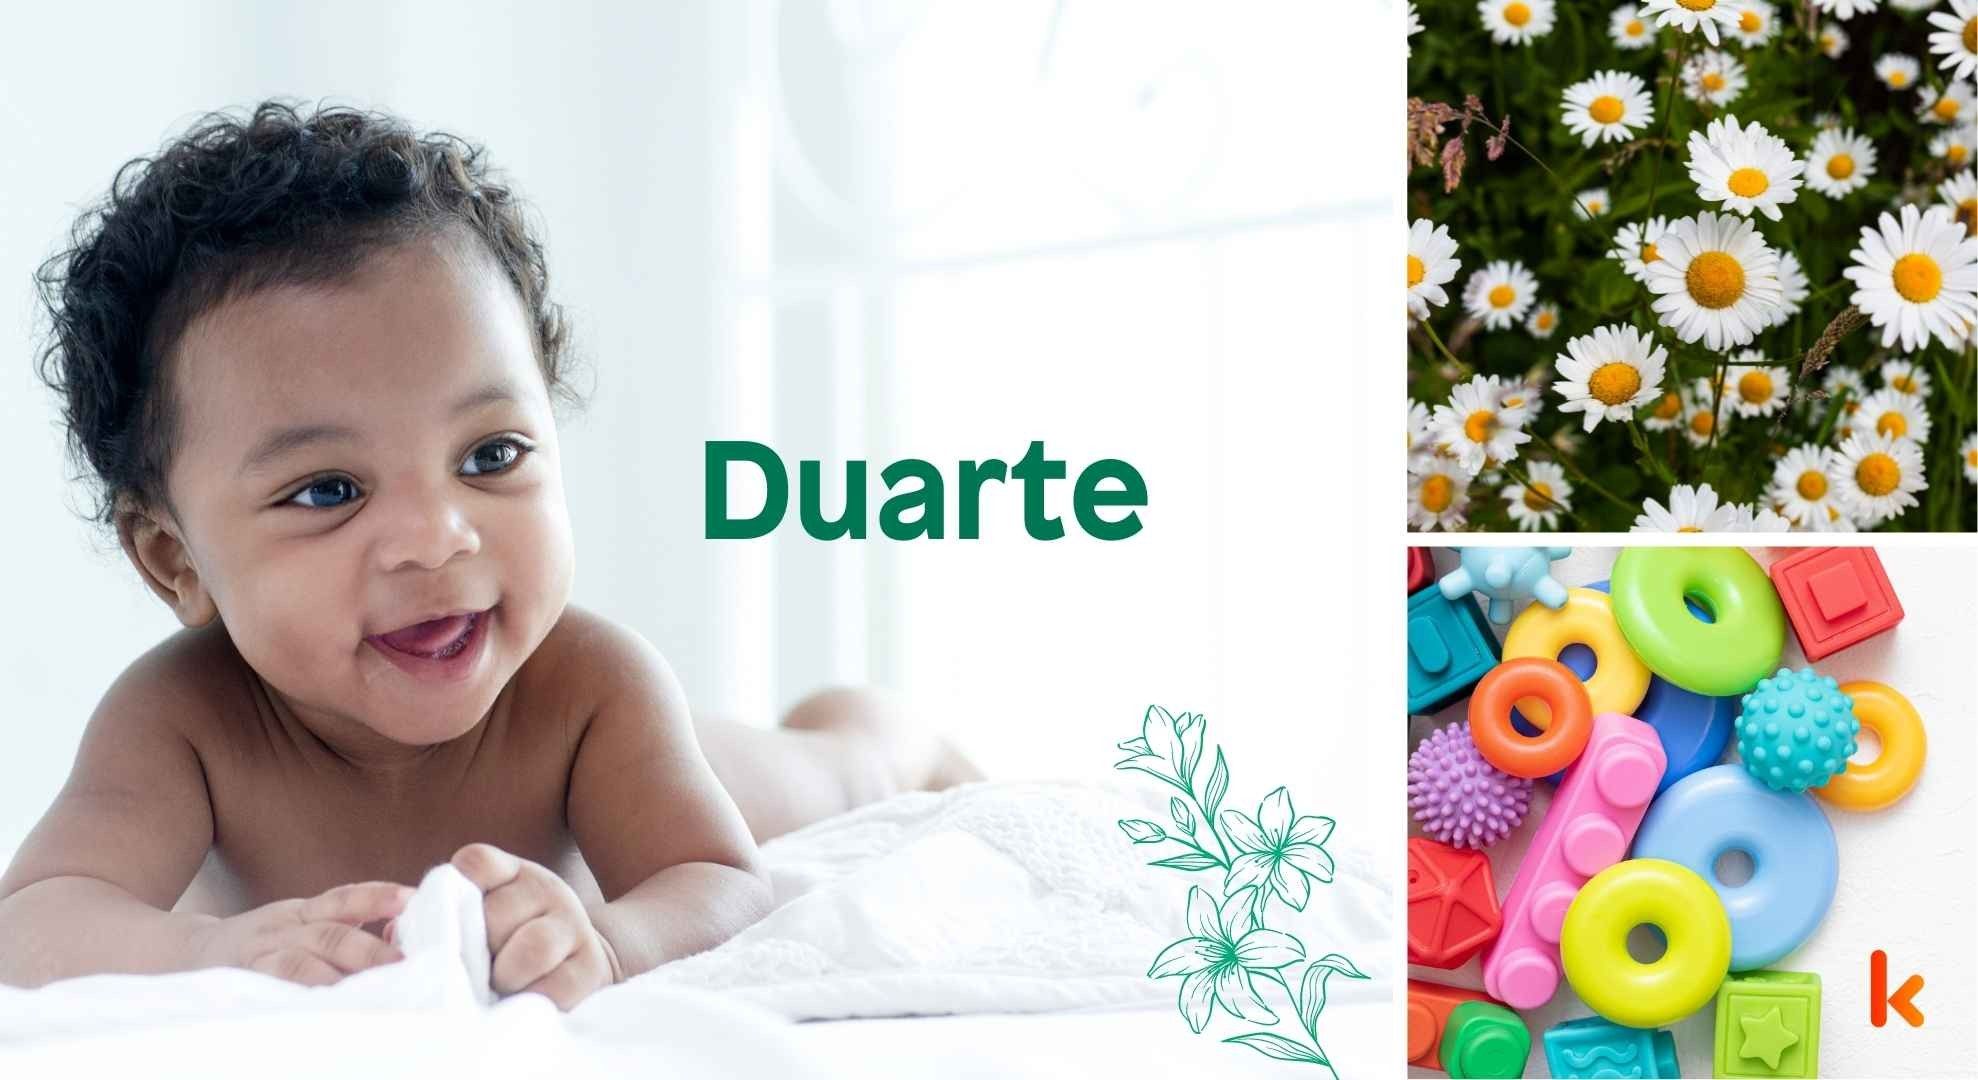 Meaning of the name Duarte